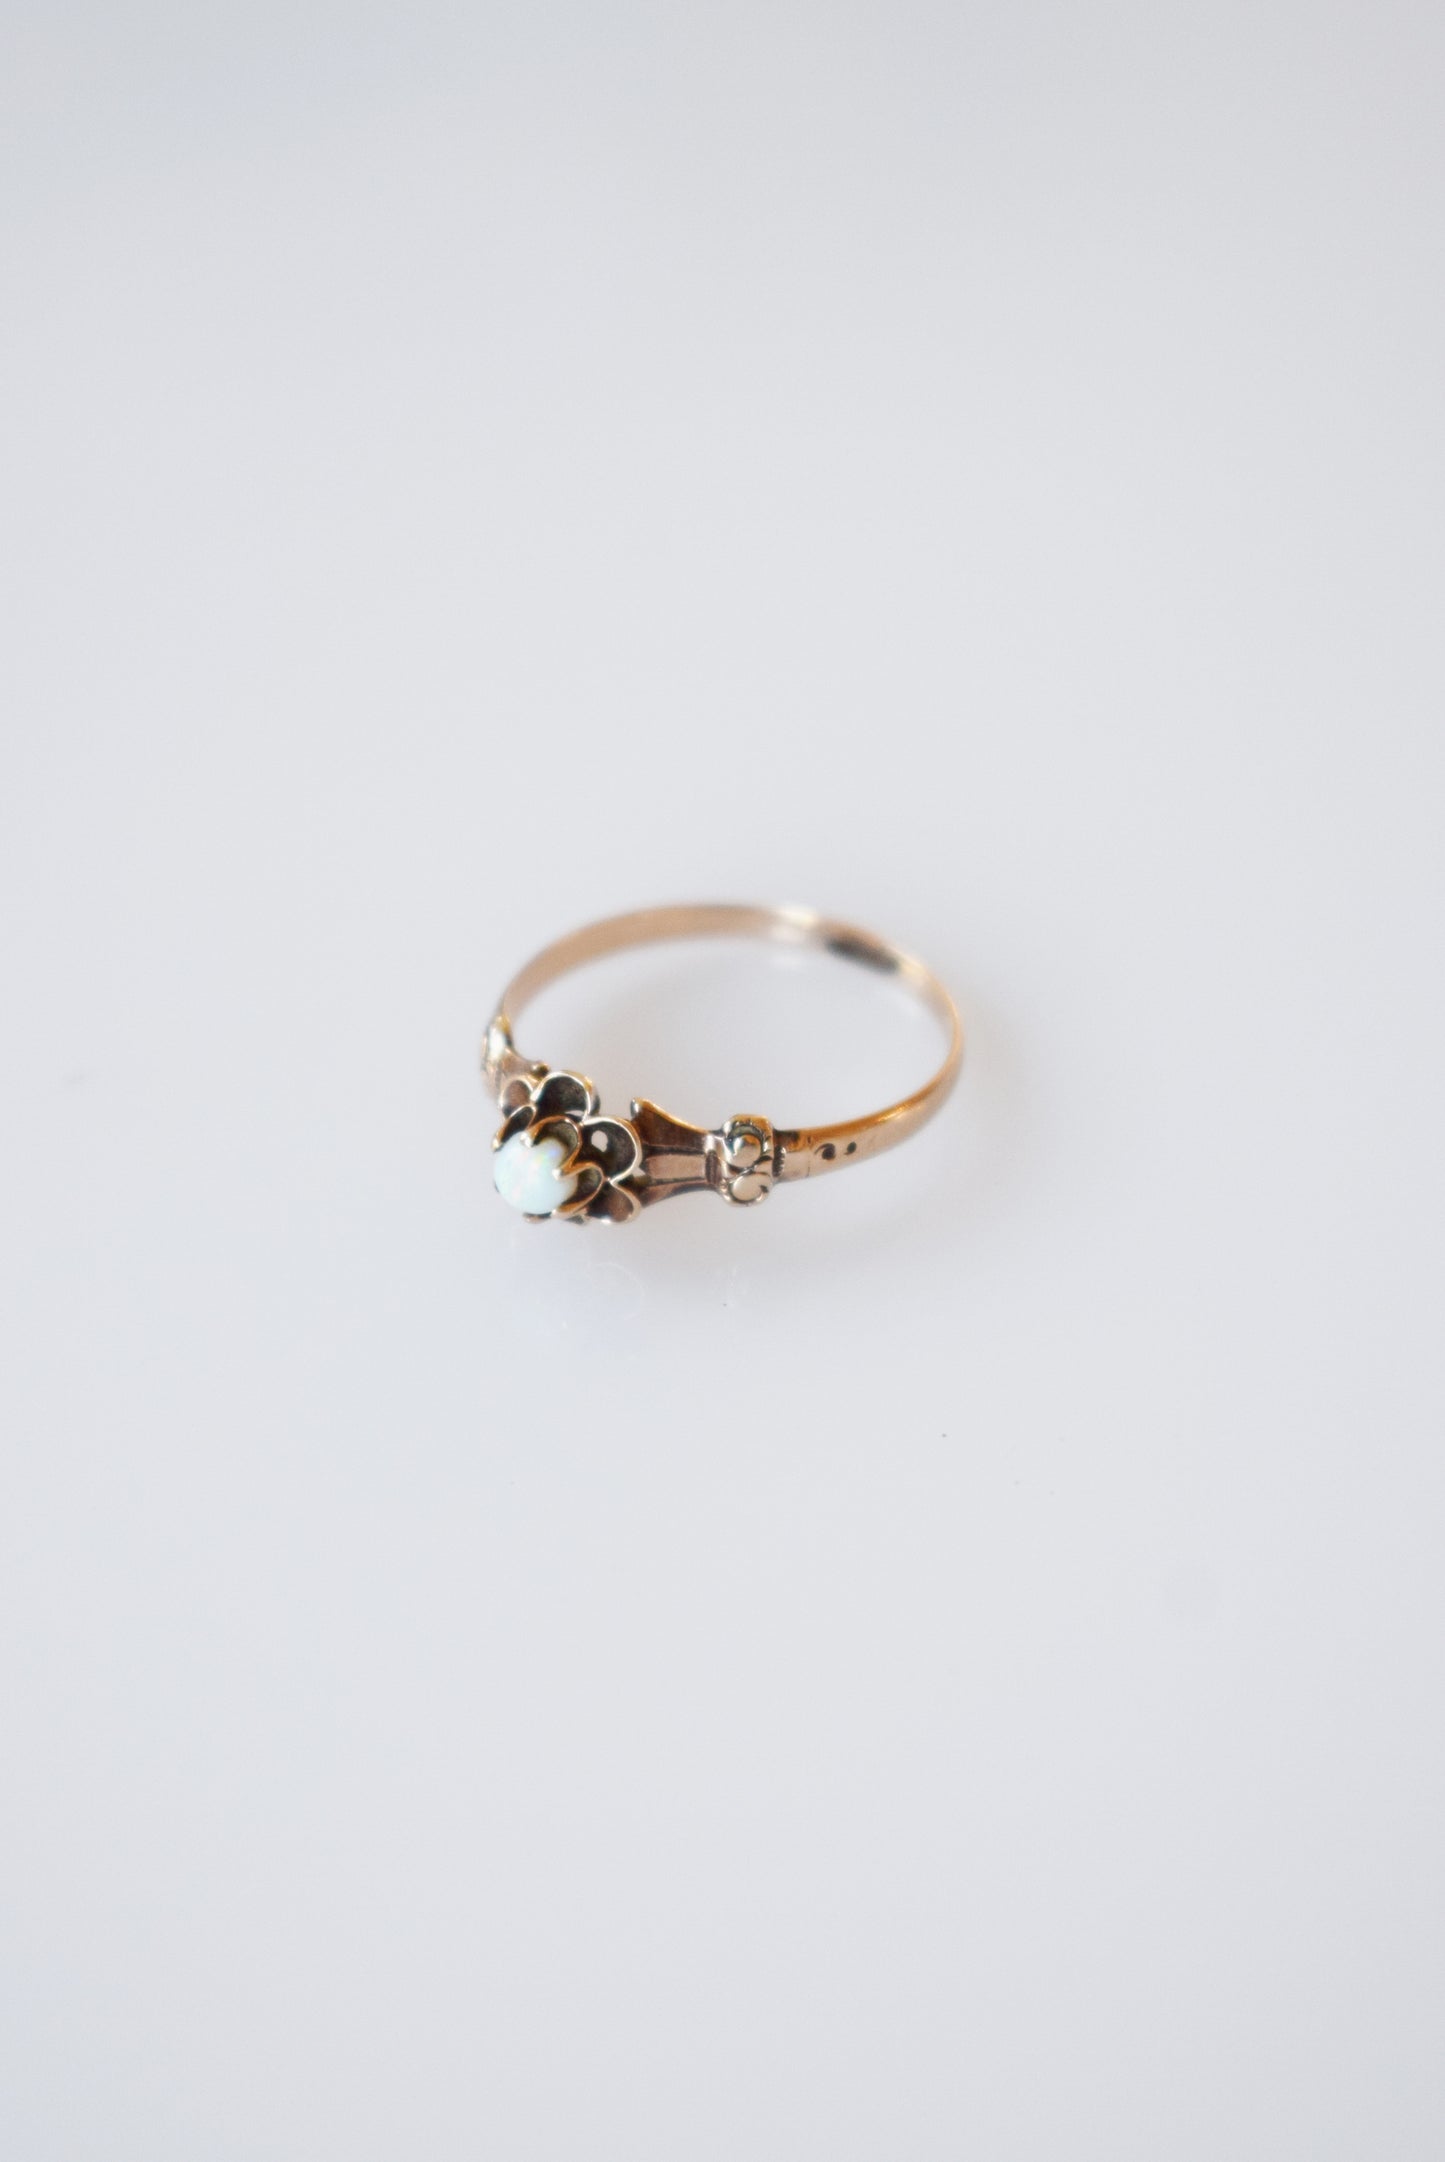 Antique Victorian 10kt Gold and Opal Ring | 6.75